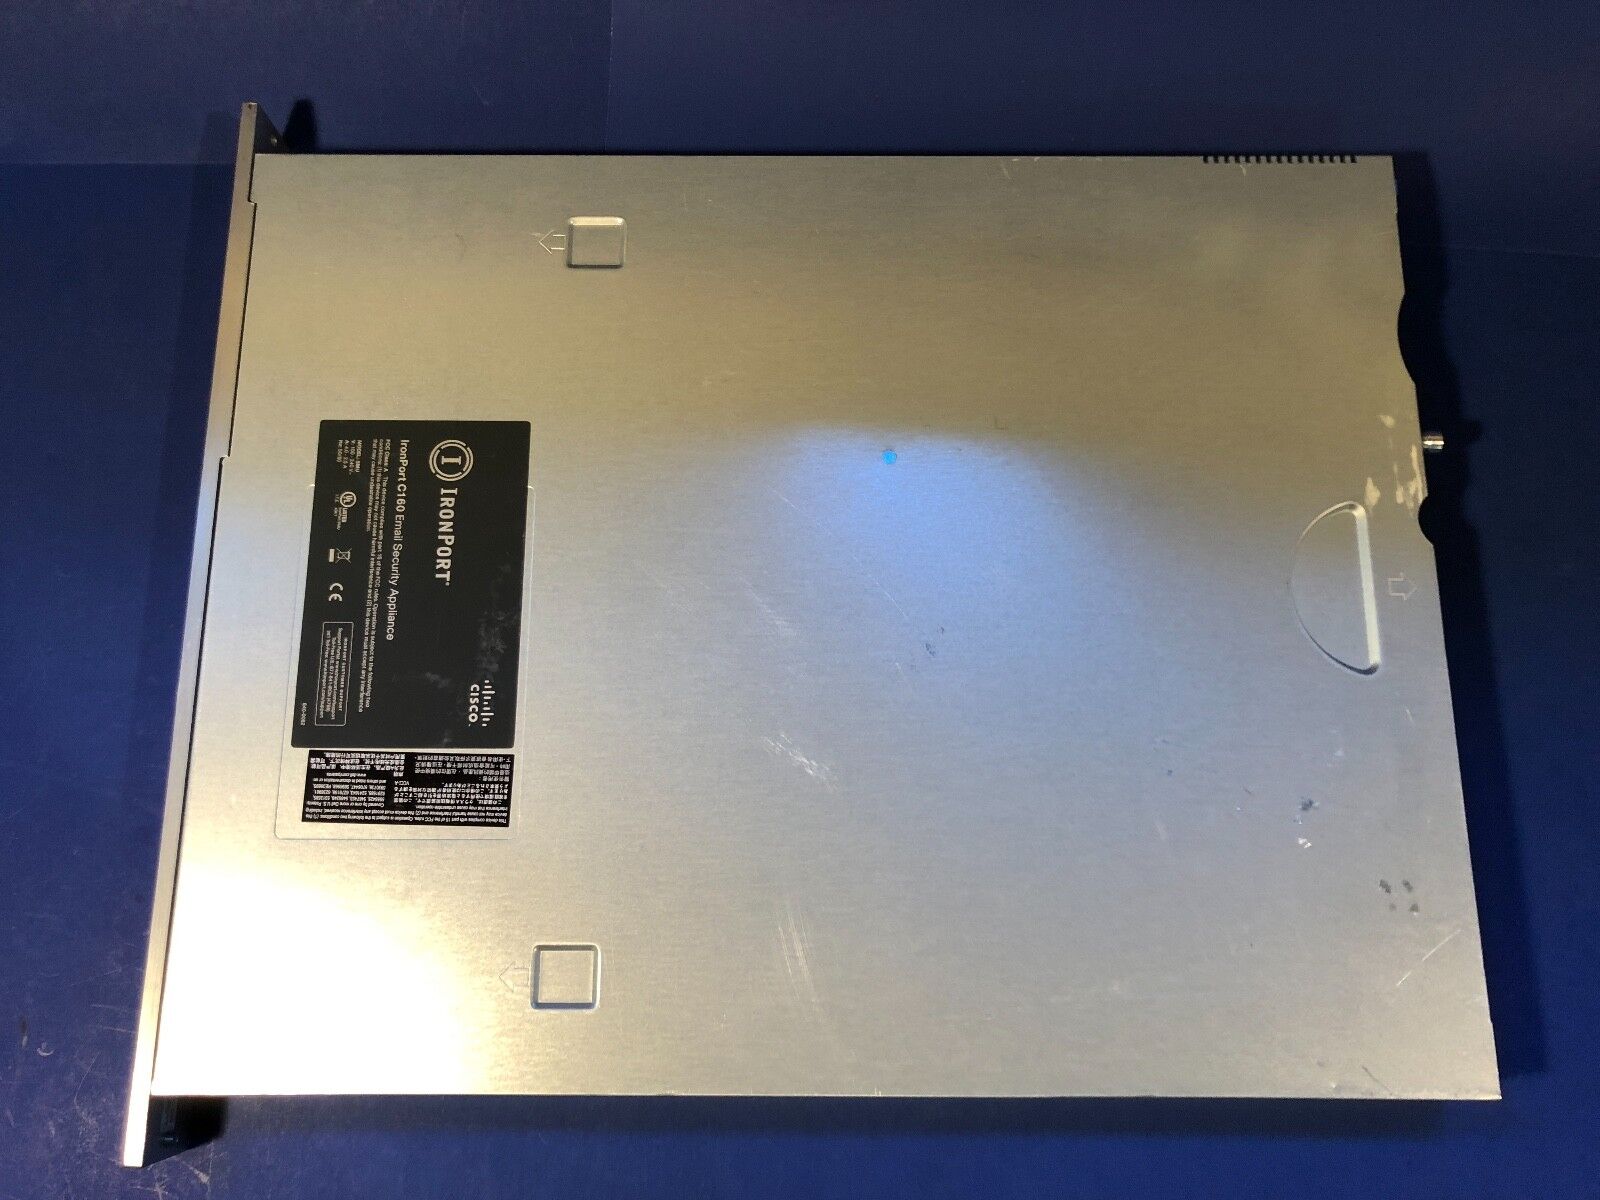 Cisco IronPort C160 Email Security Appliance Model SMU 